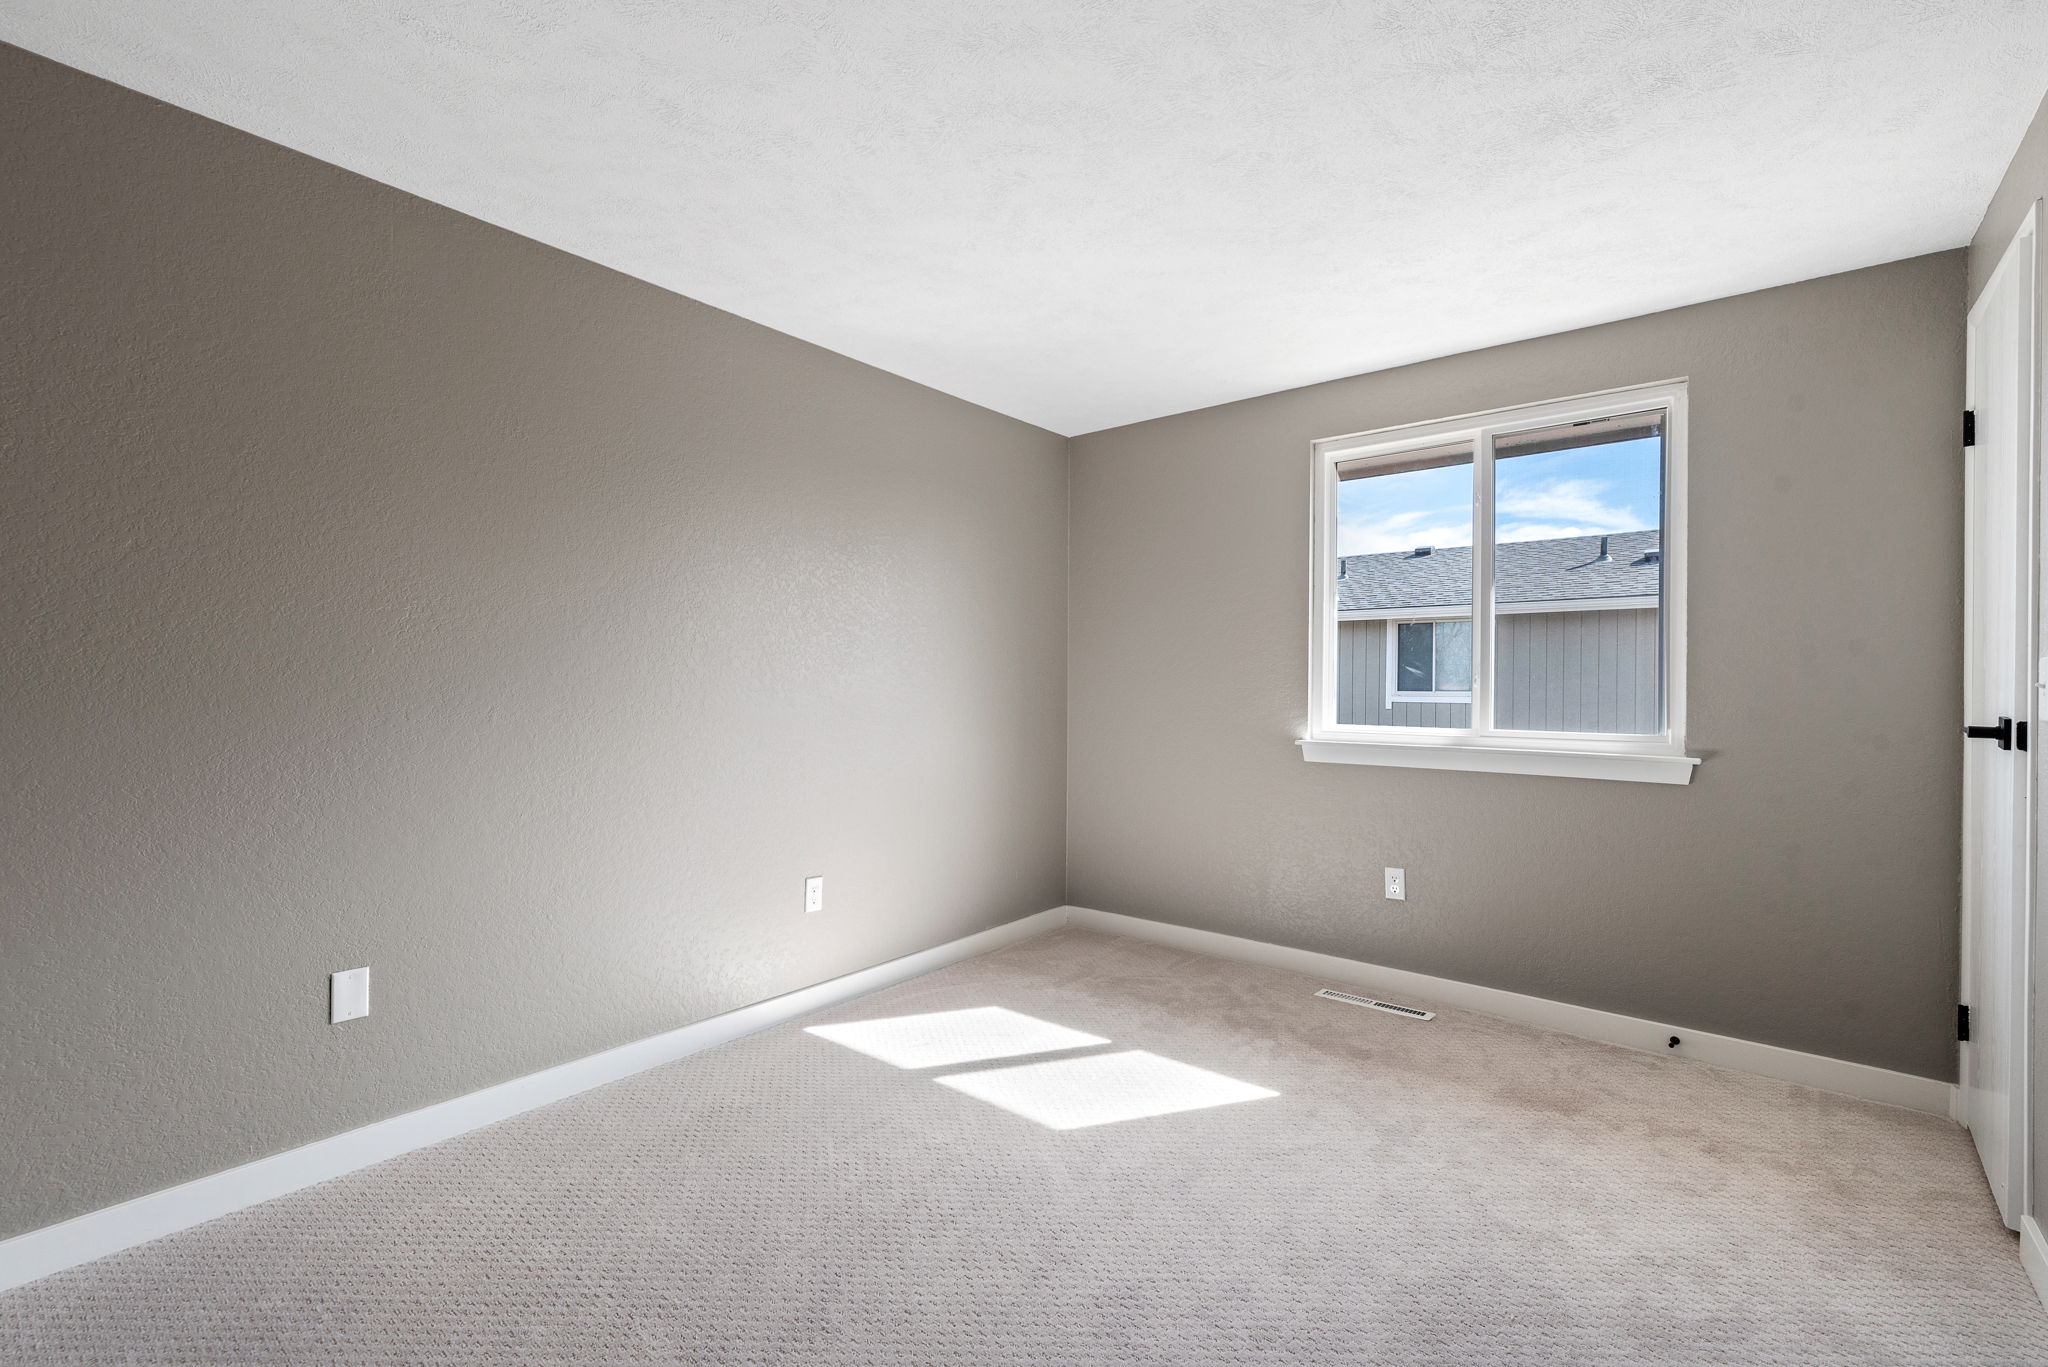  9323 N Ingalls St, Westminster, CO 80031, US Photo 20